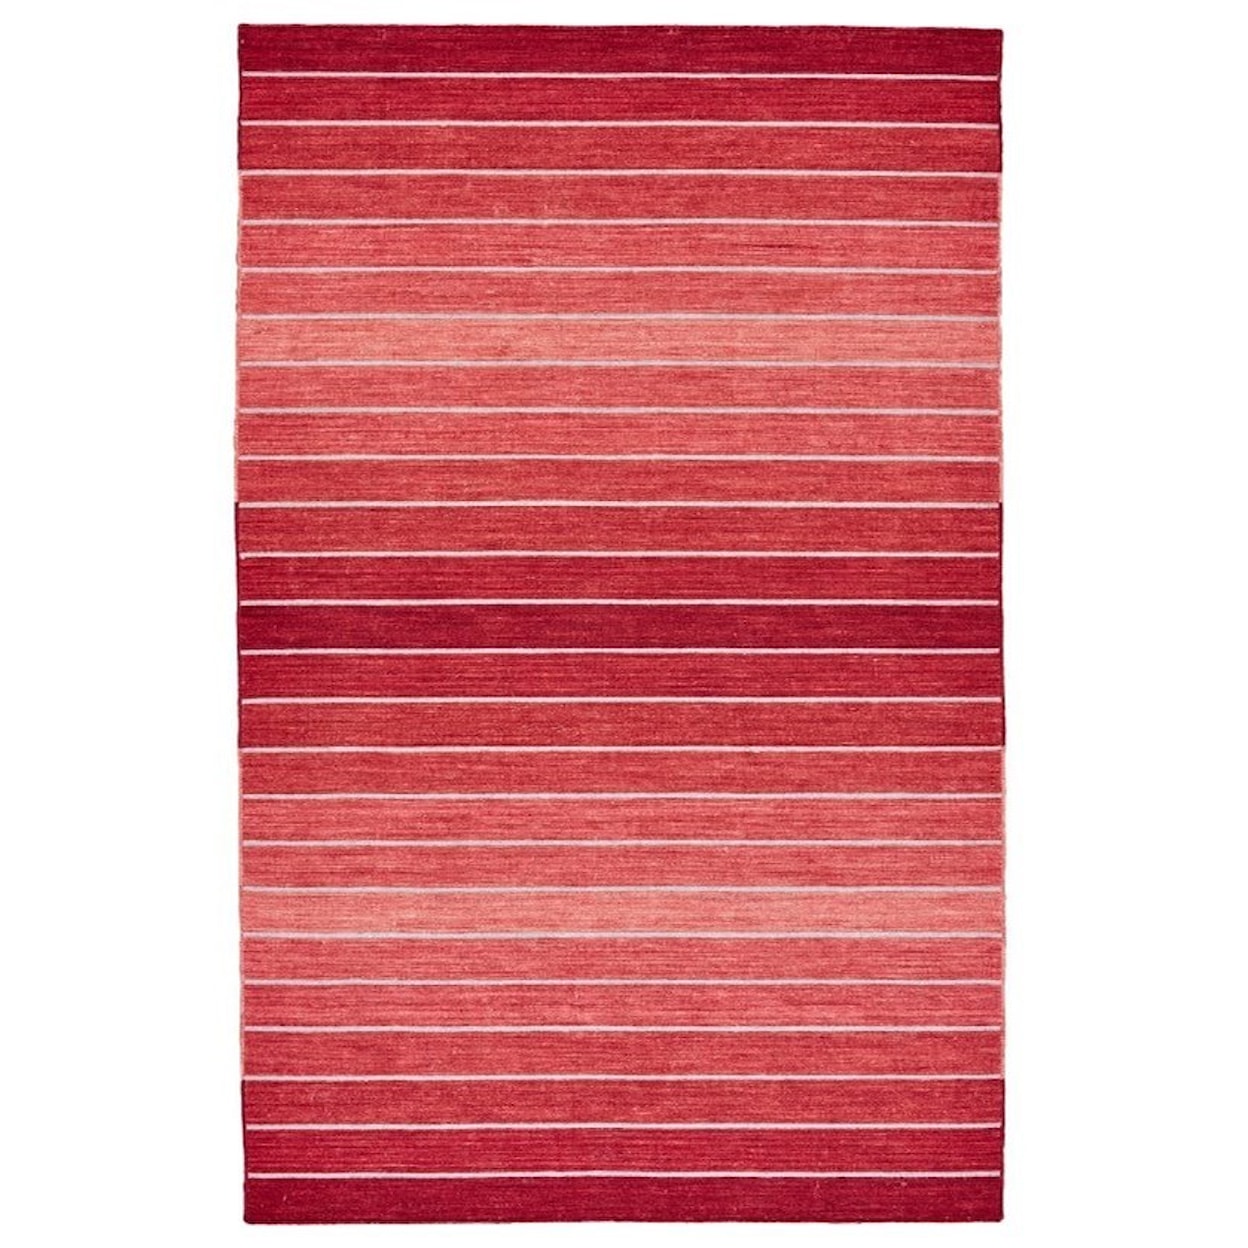 Feizy Rugs Santino Red 5' x 8' Area Rug